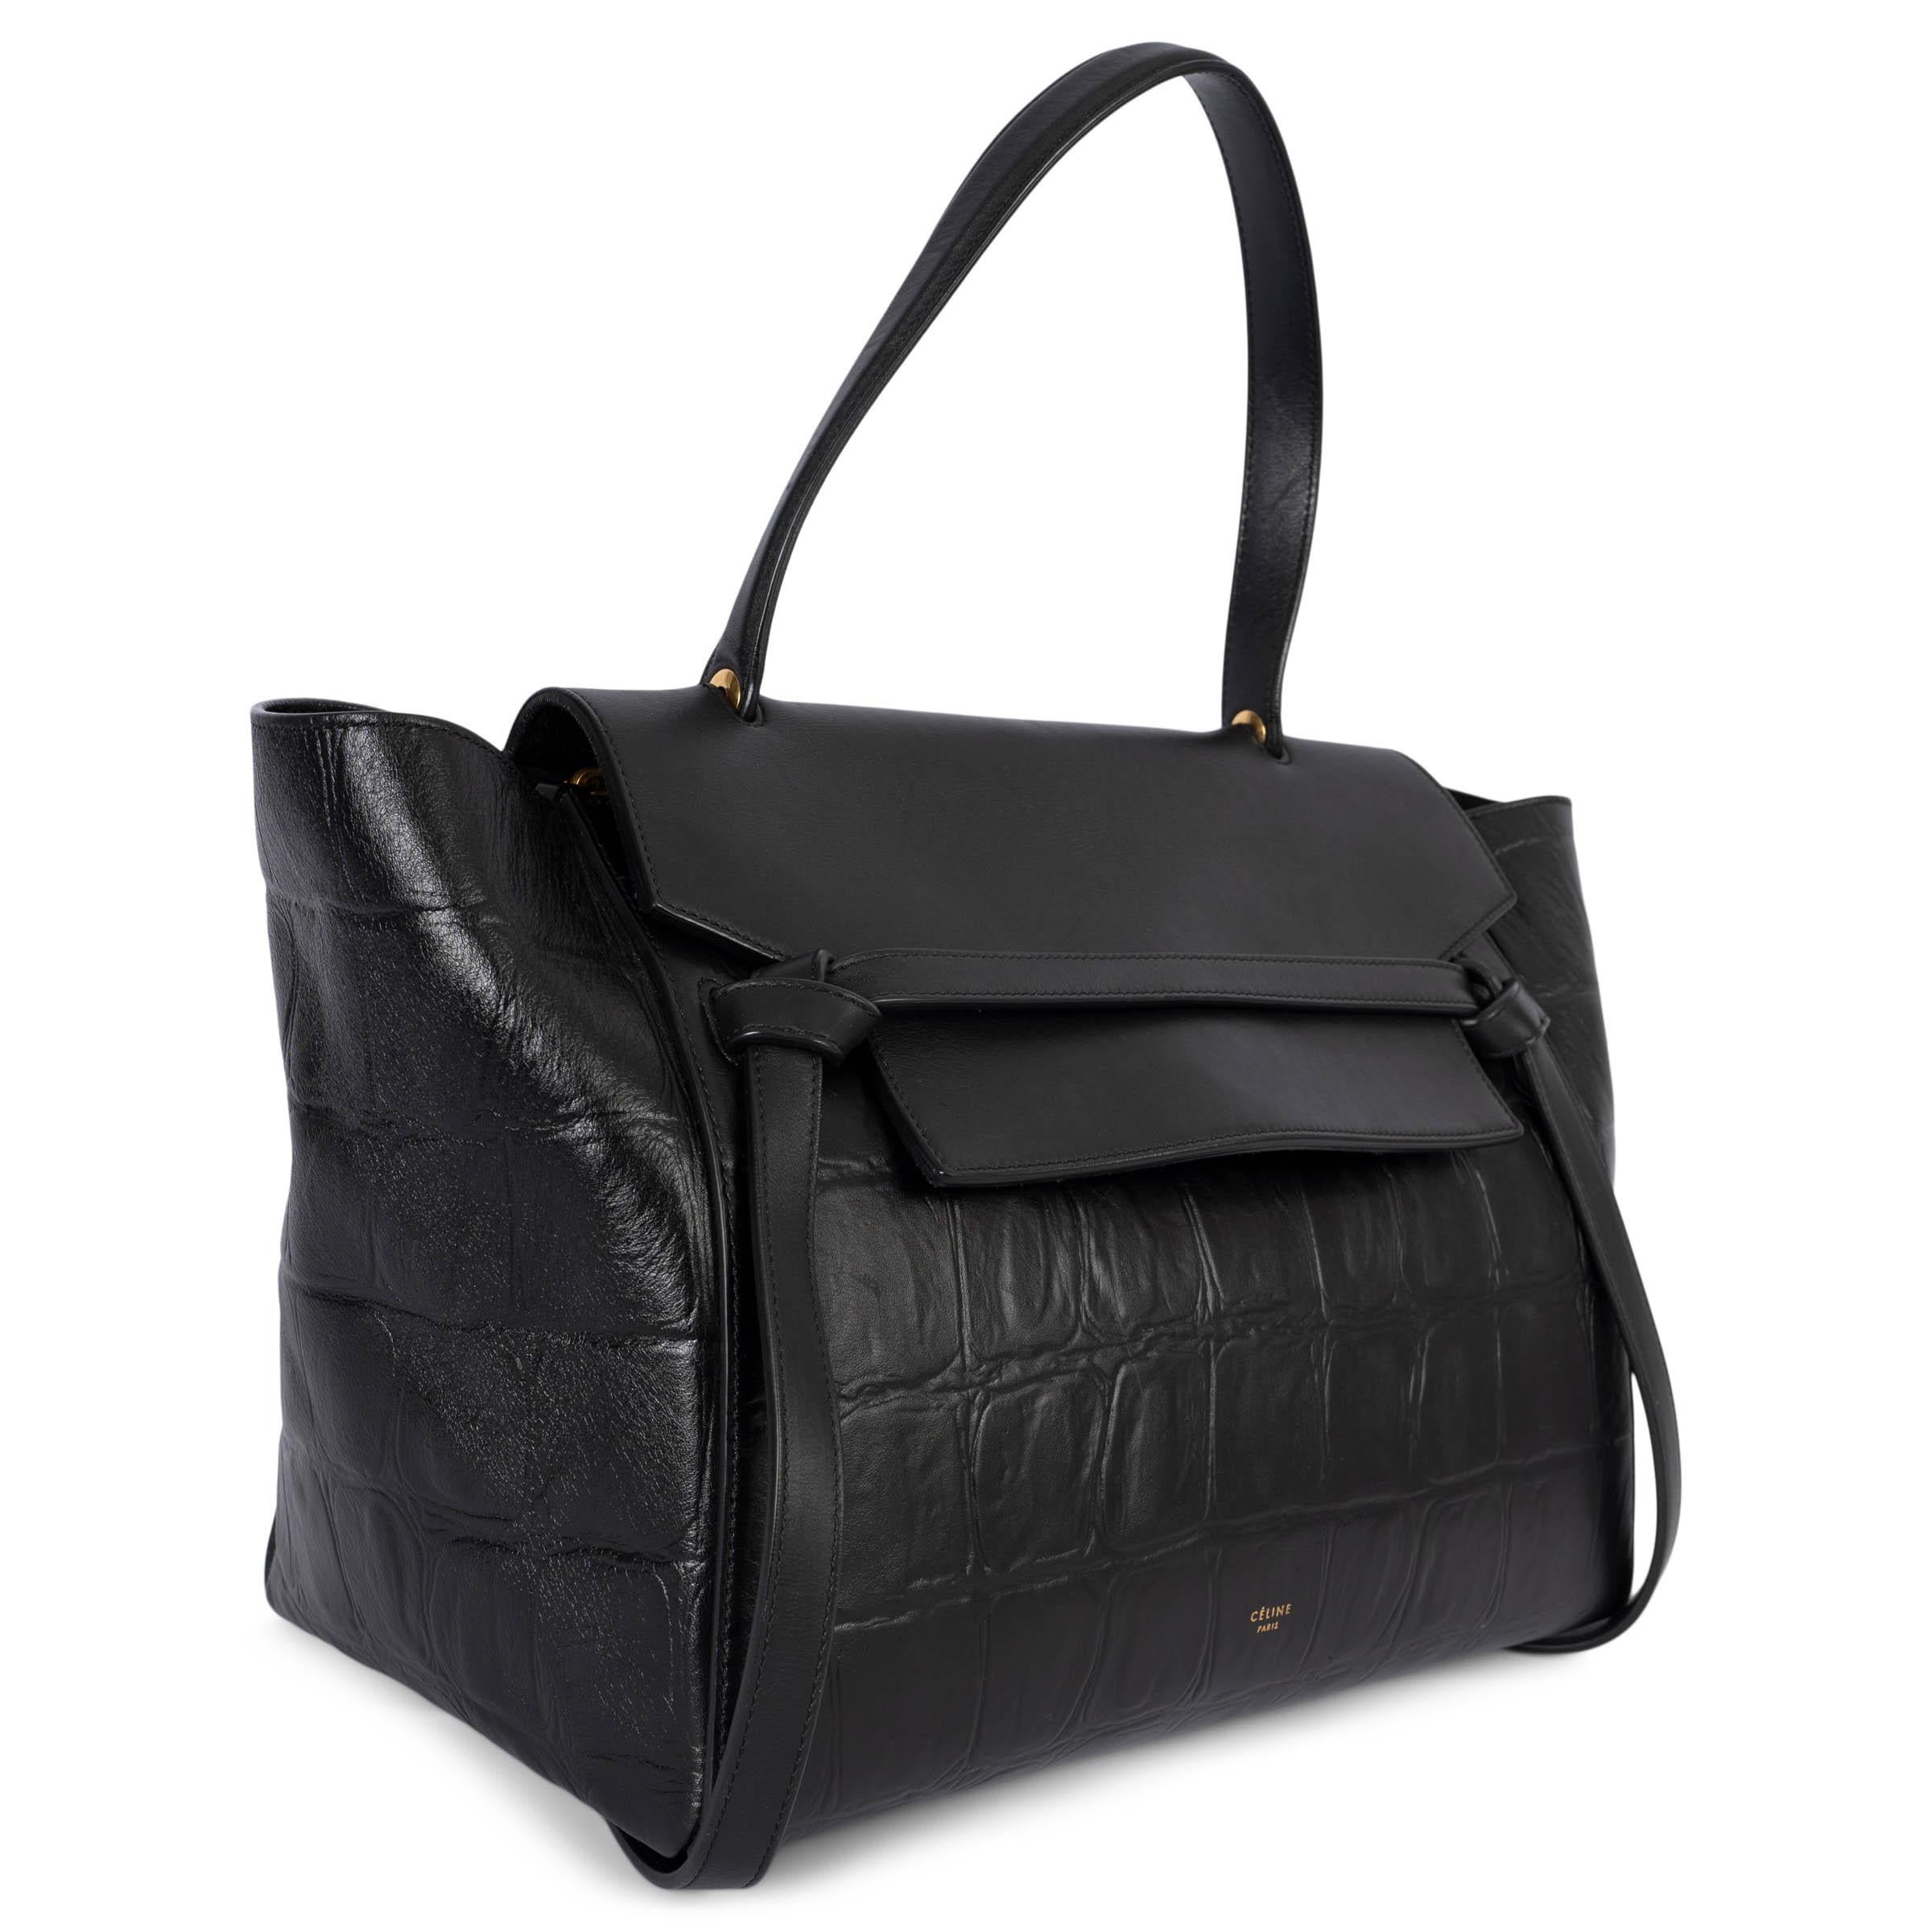 100% authentic Céline by Pheobe Philo Small Belt bag in black crocodile embossed leather with smooth calf leather flap. Features a zip pocket on the outside back. Closes with flap and zipper on top. Lined in suede with two open pockets against the